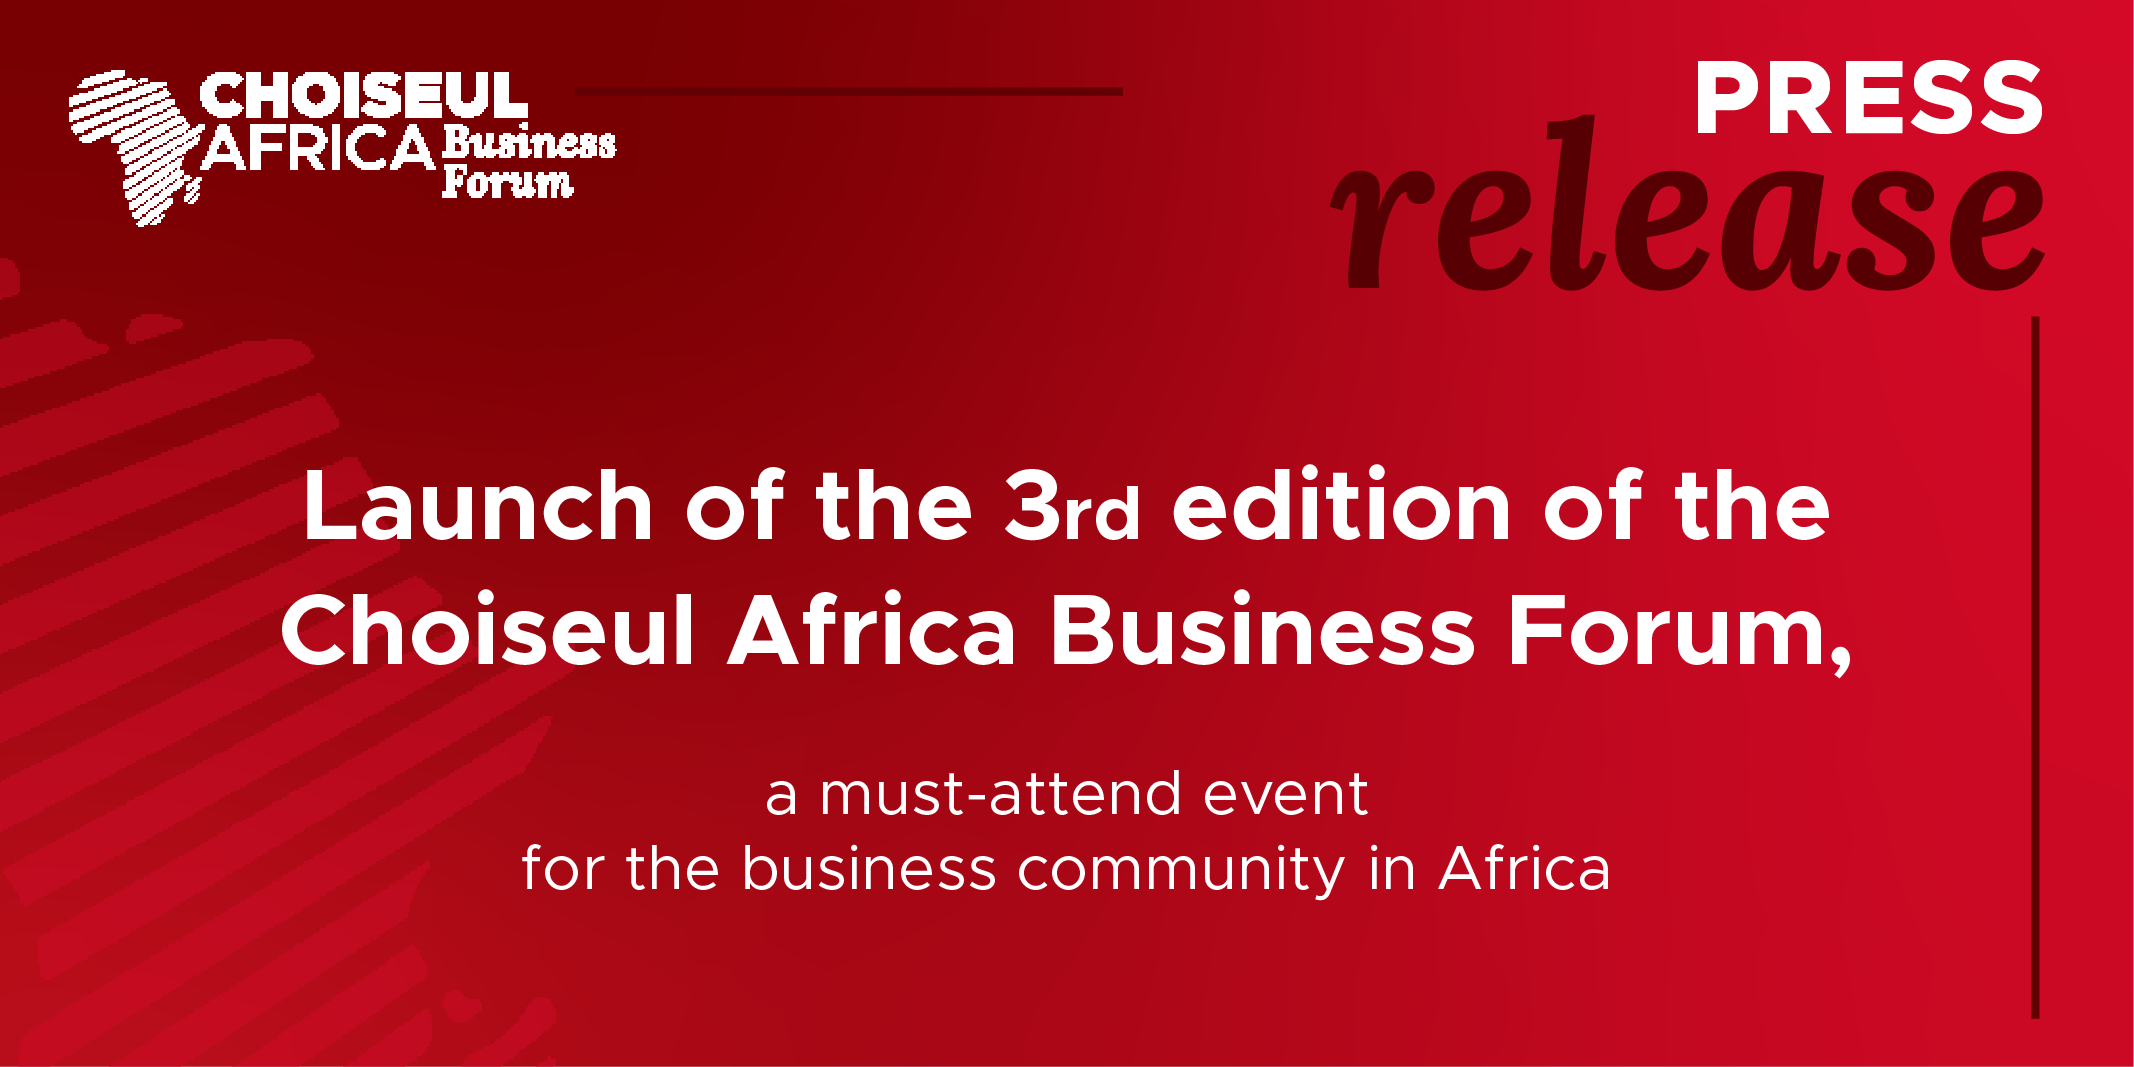 Press Release : Launch of the 3rd edition of the Choiseul Africa Business Forum, a must-attend event for the business community in Africa